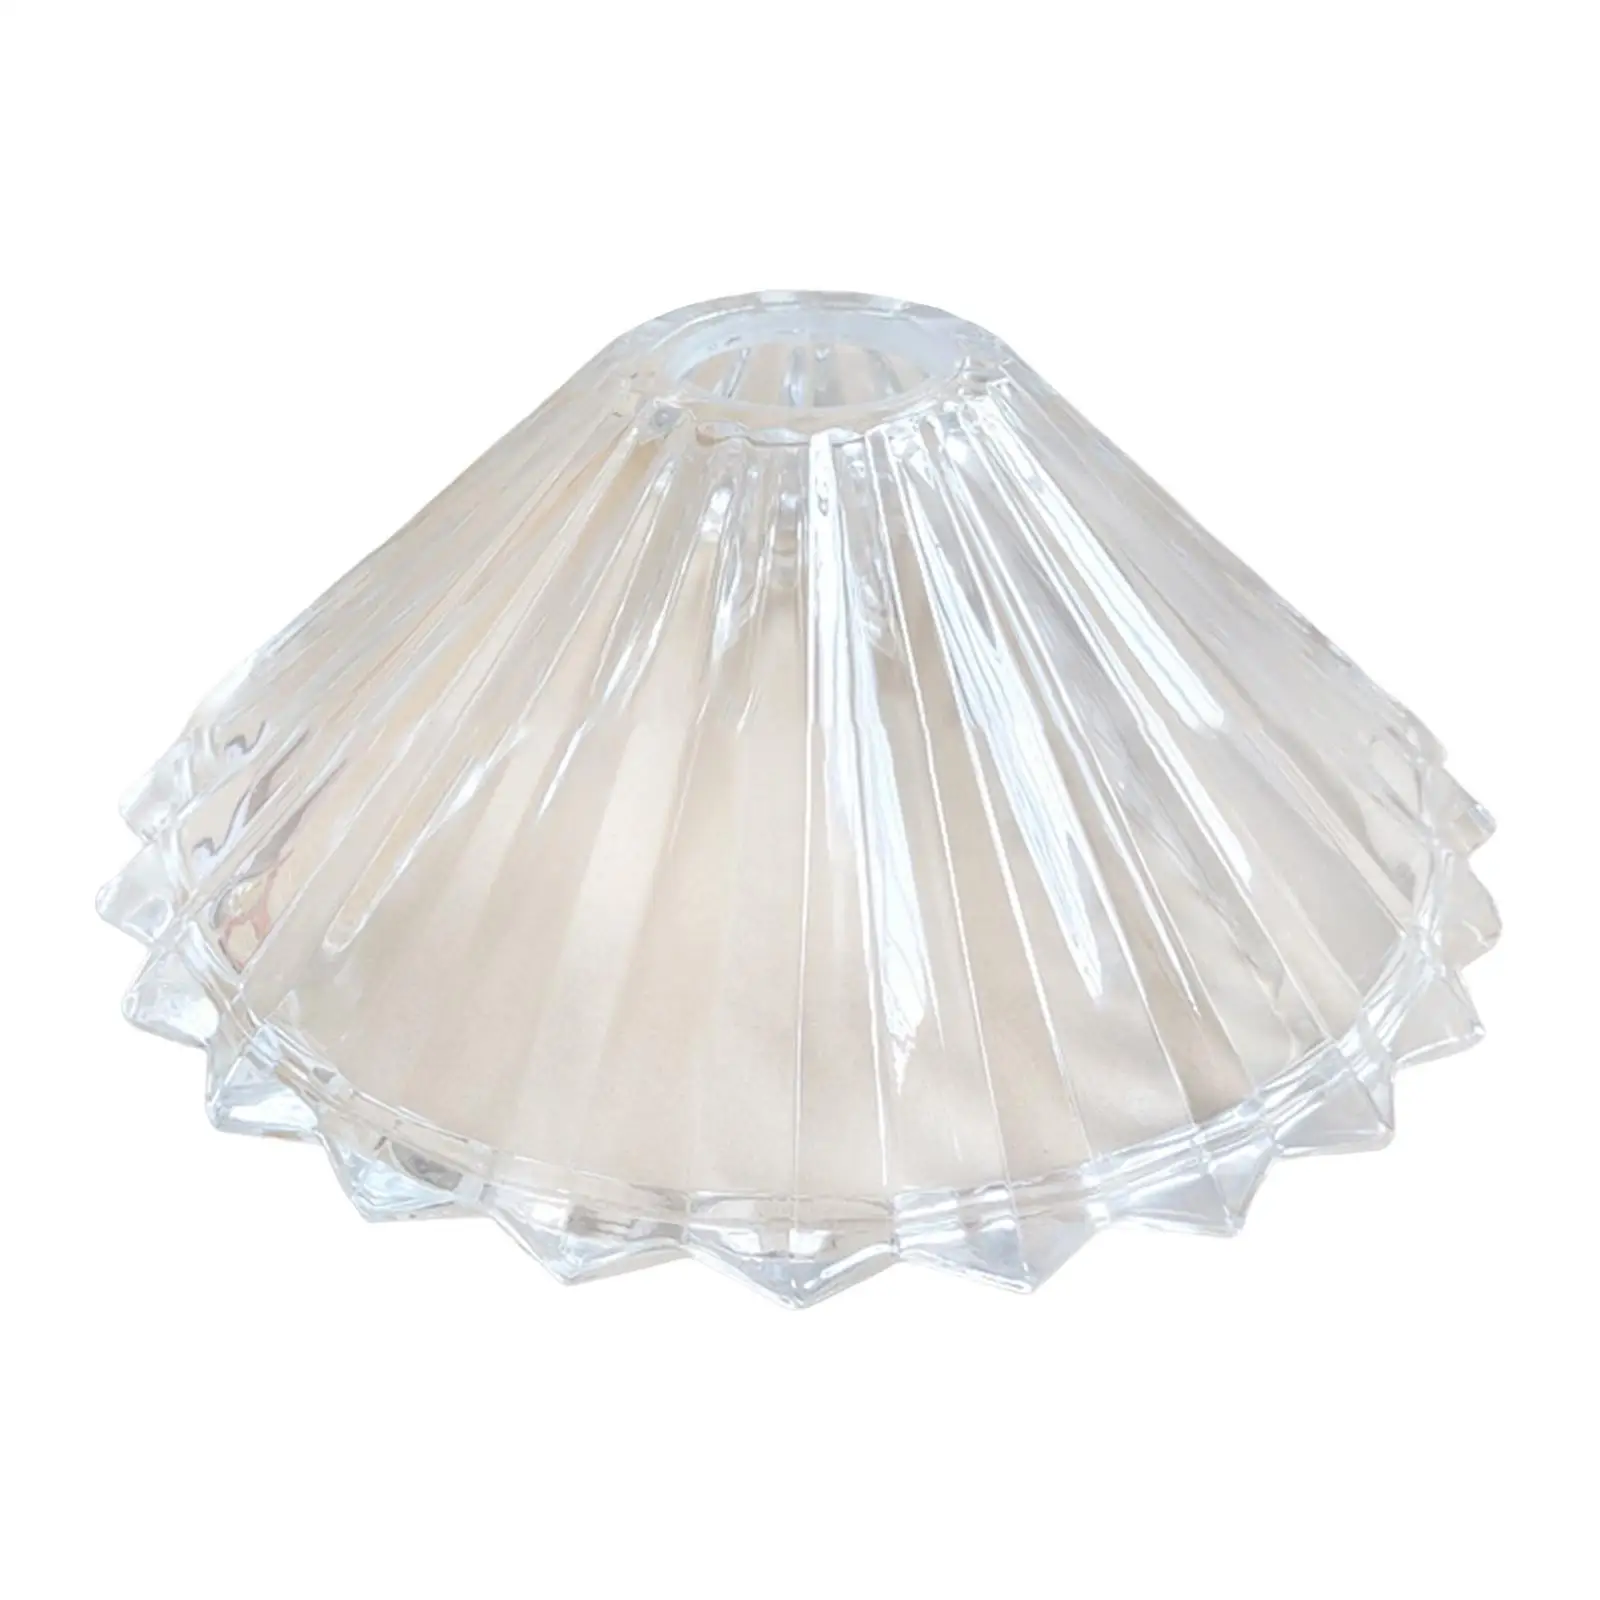 Crystal Lamp Shade Cover Replacement Ceiling Glass Shade for Dining Room Bar